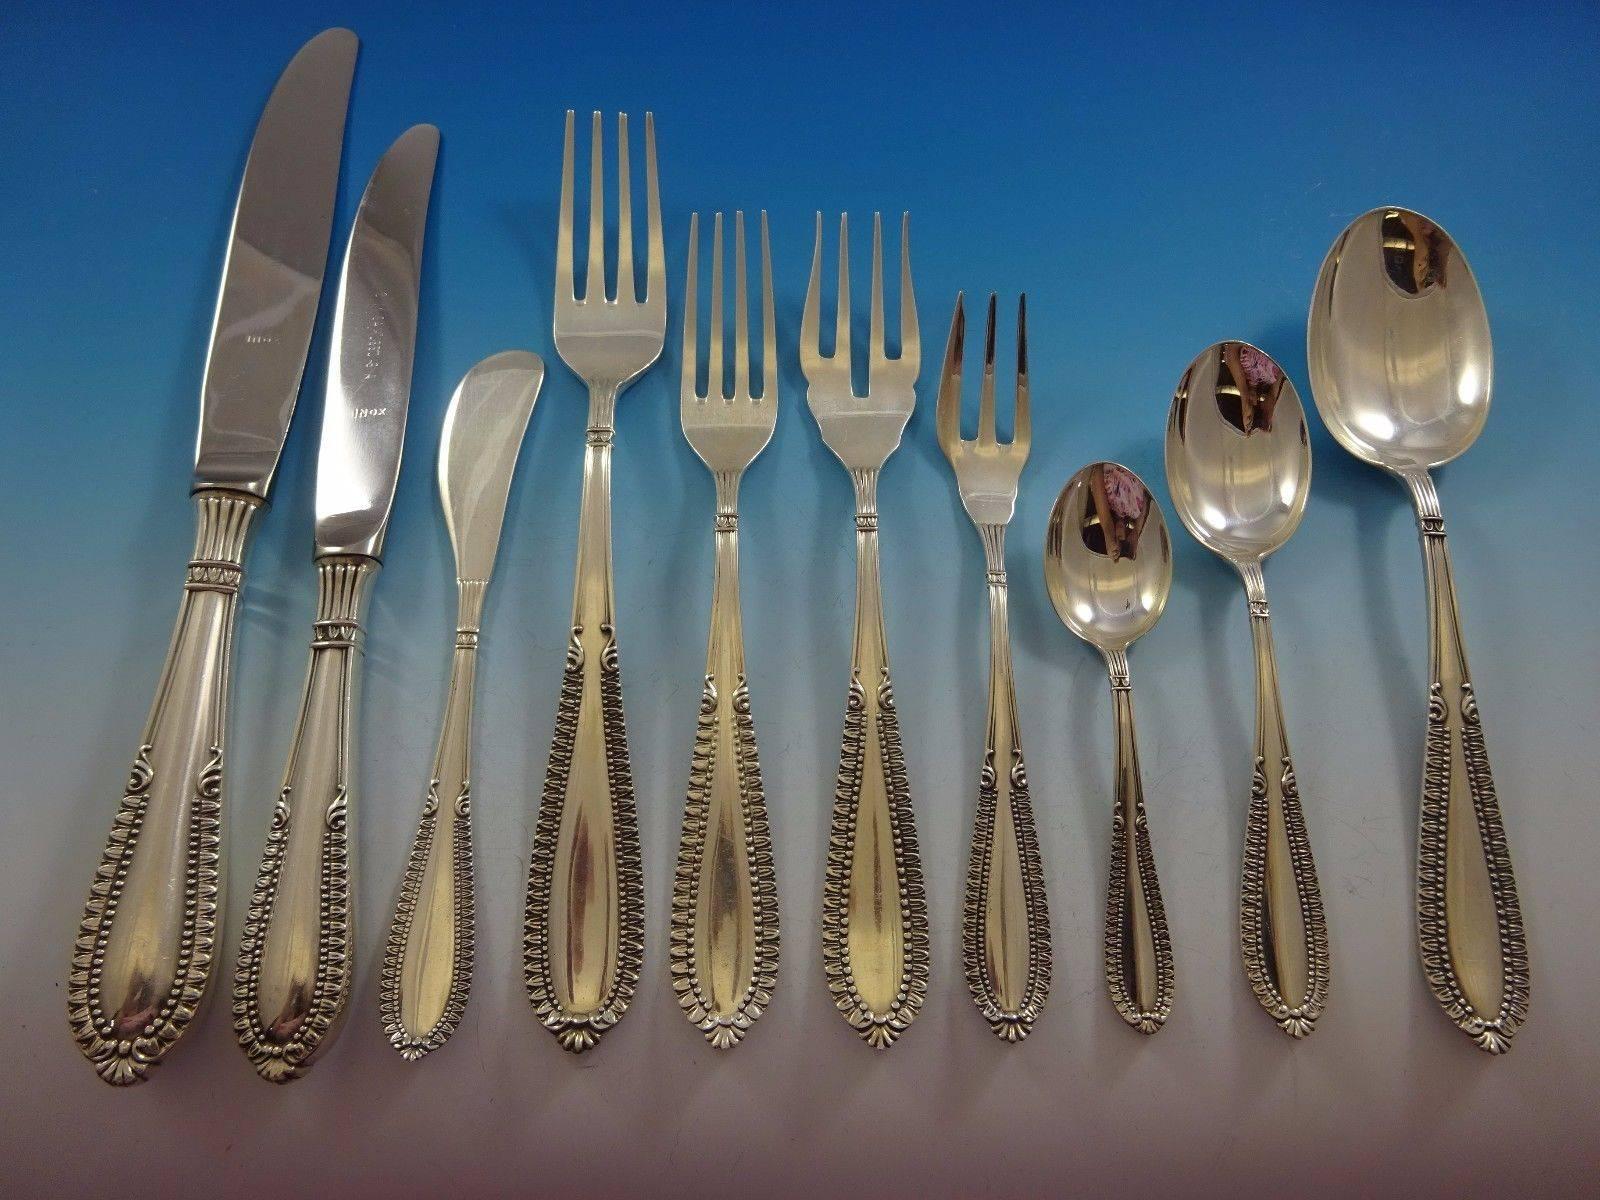 Gran Paris by Camusso (Peru) Sterling Silver Flatware Set of 133 Pieces includes: 12 dinner knives, 9 1/4